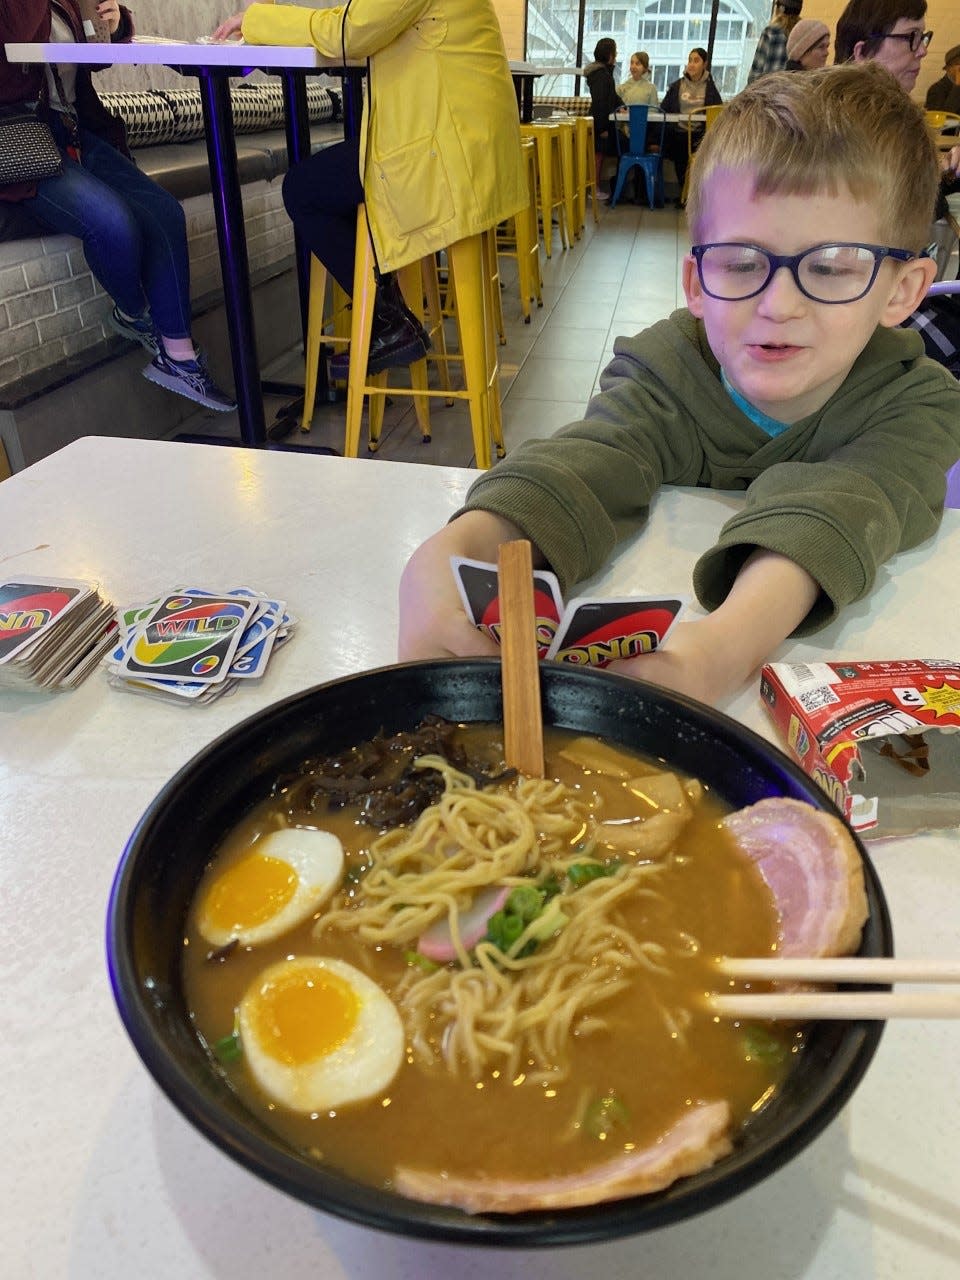 Donnelly Lane checks out the ramen while playing Uno at Zero Degrees.